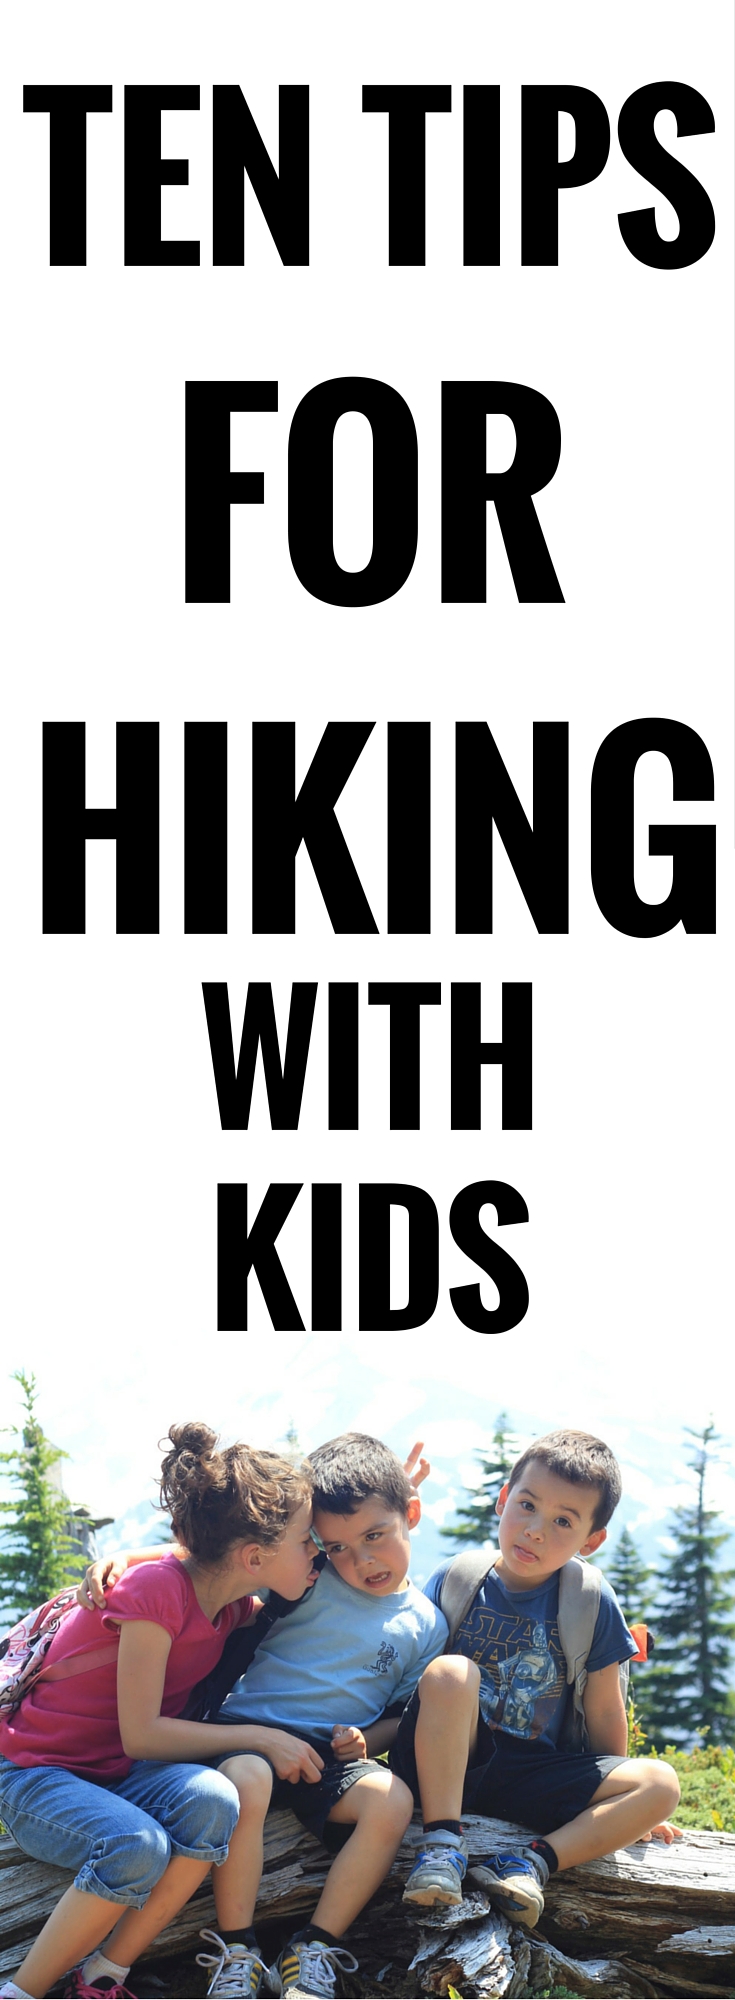 Ten Tips for Hiking with kids . Hiking with small children? These tips and tricks will help make the experience a little more enjoyable.